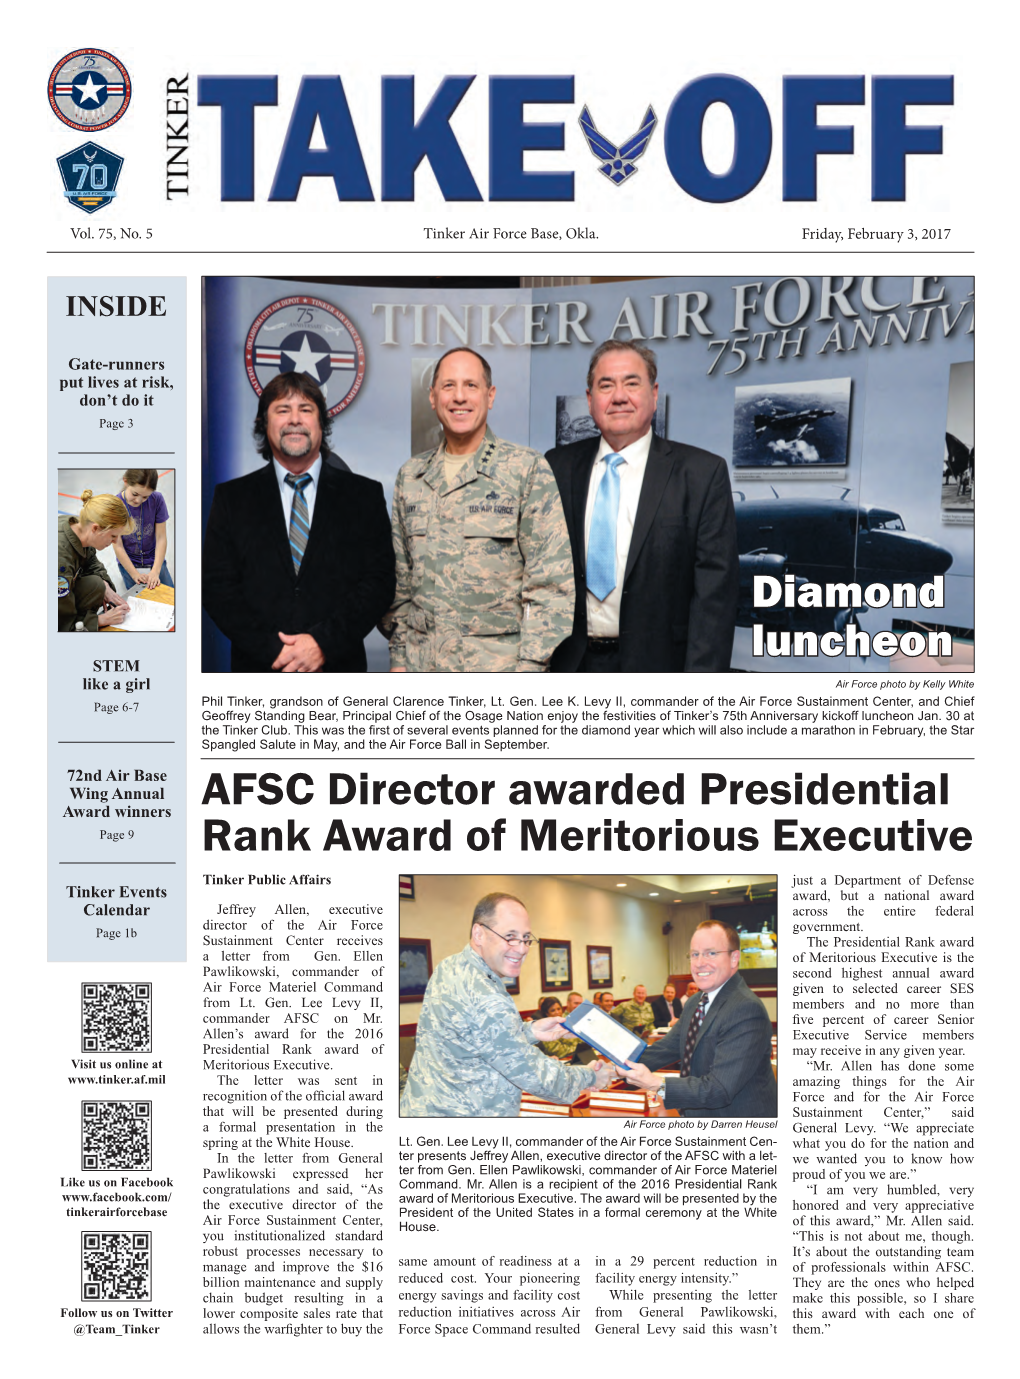 AFSC Director Awarded Presidential Rank Award of Meritorious